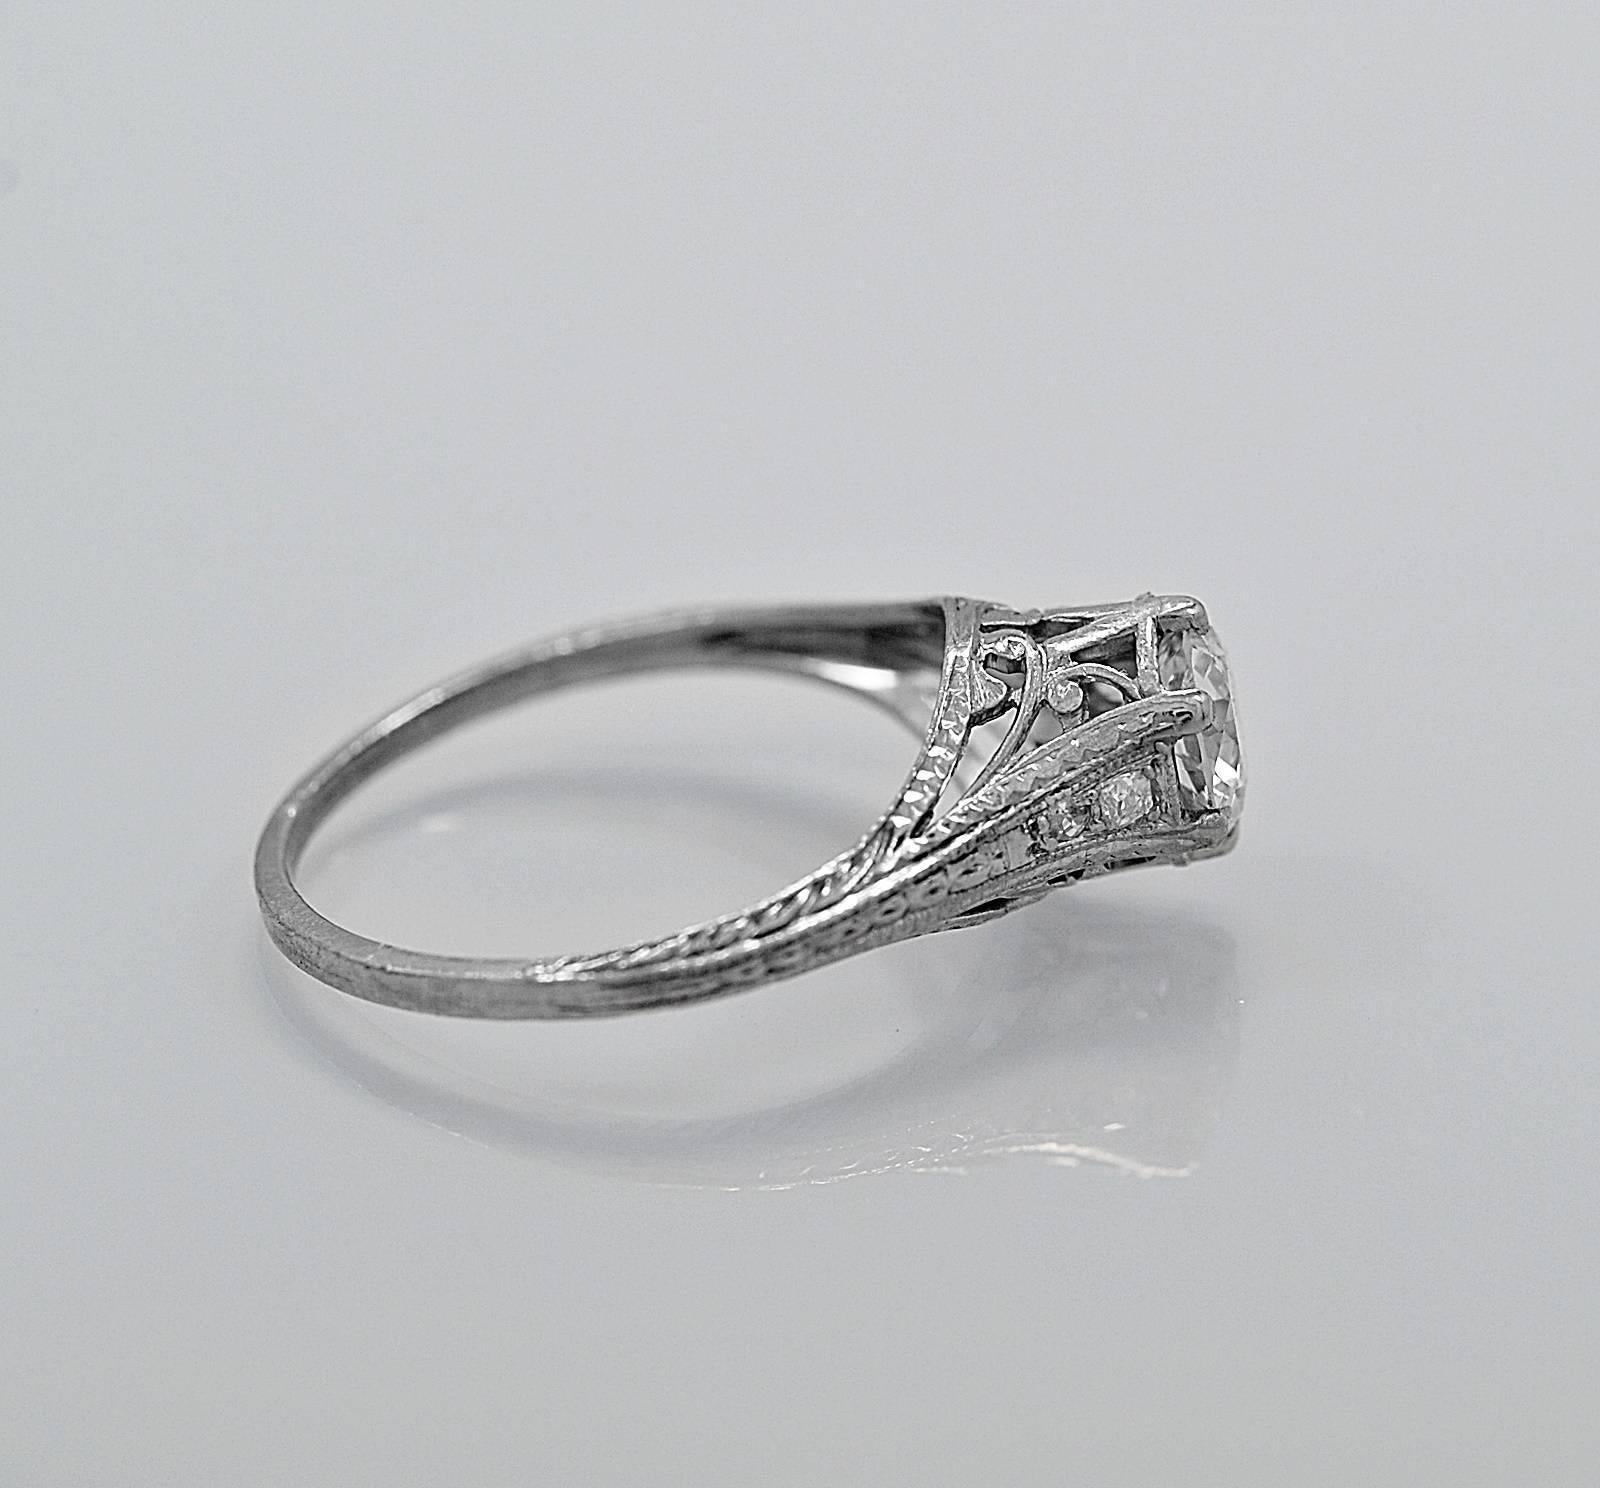 A delightful Art Deco platinum antique engagement ring featuring a .65ct. apx. European cut diamond with accenting .08ct. apx. T.W. diamond melee. The color is H with SI2 clarity. This ring is a stunning example of craftsmanship. The mounting